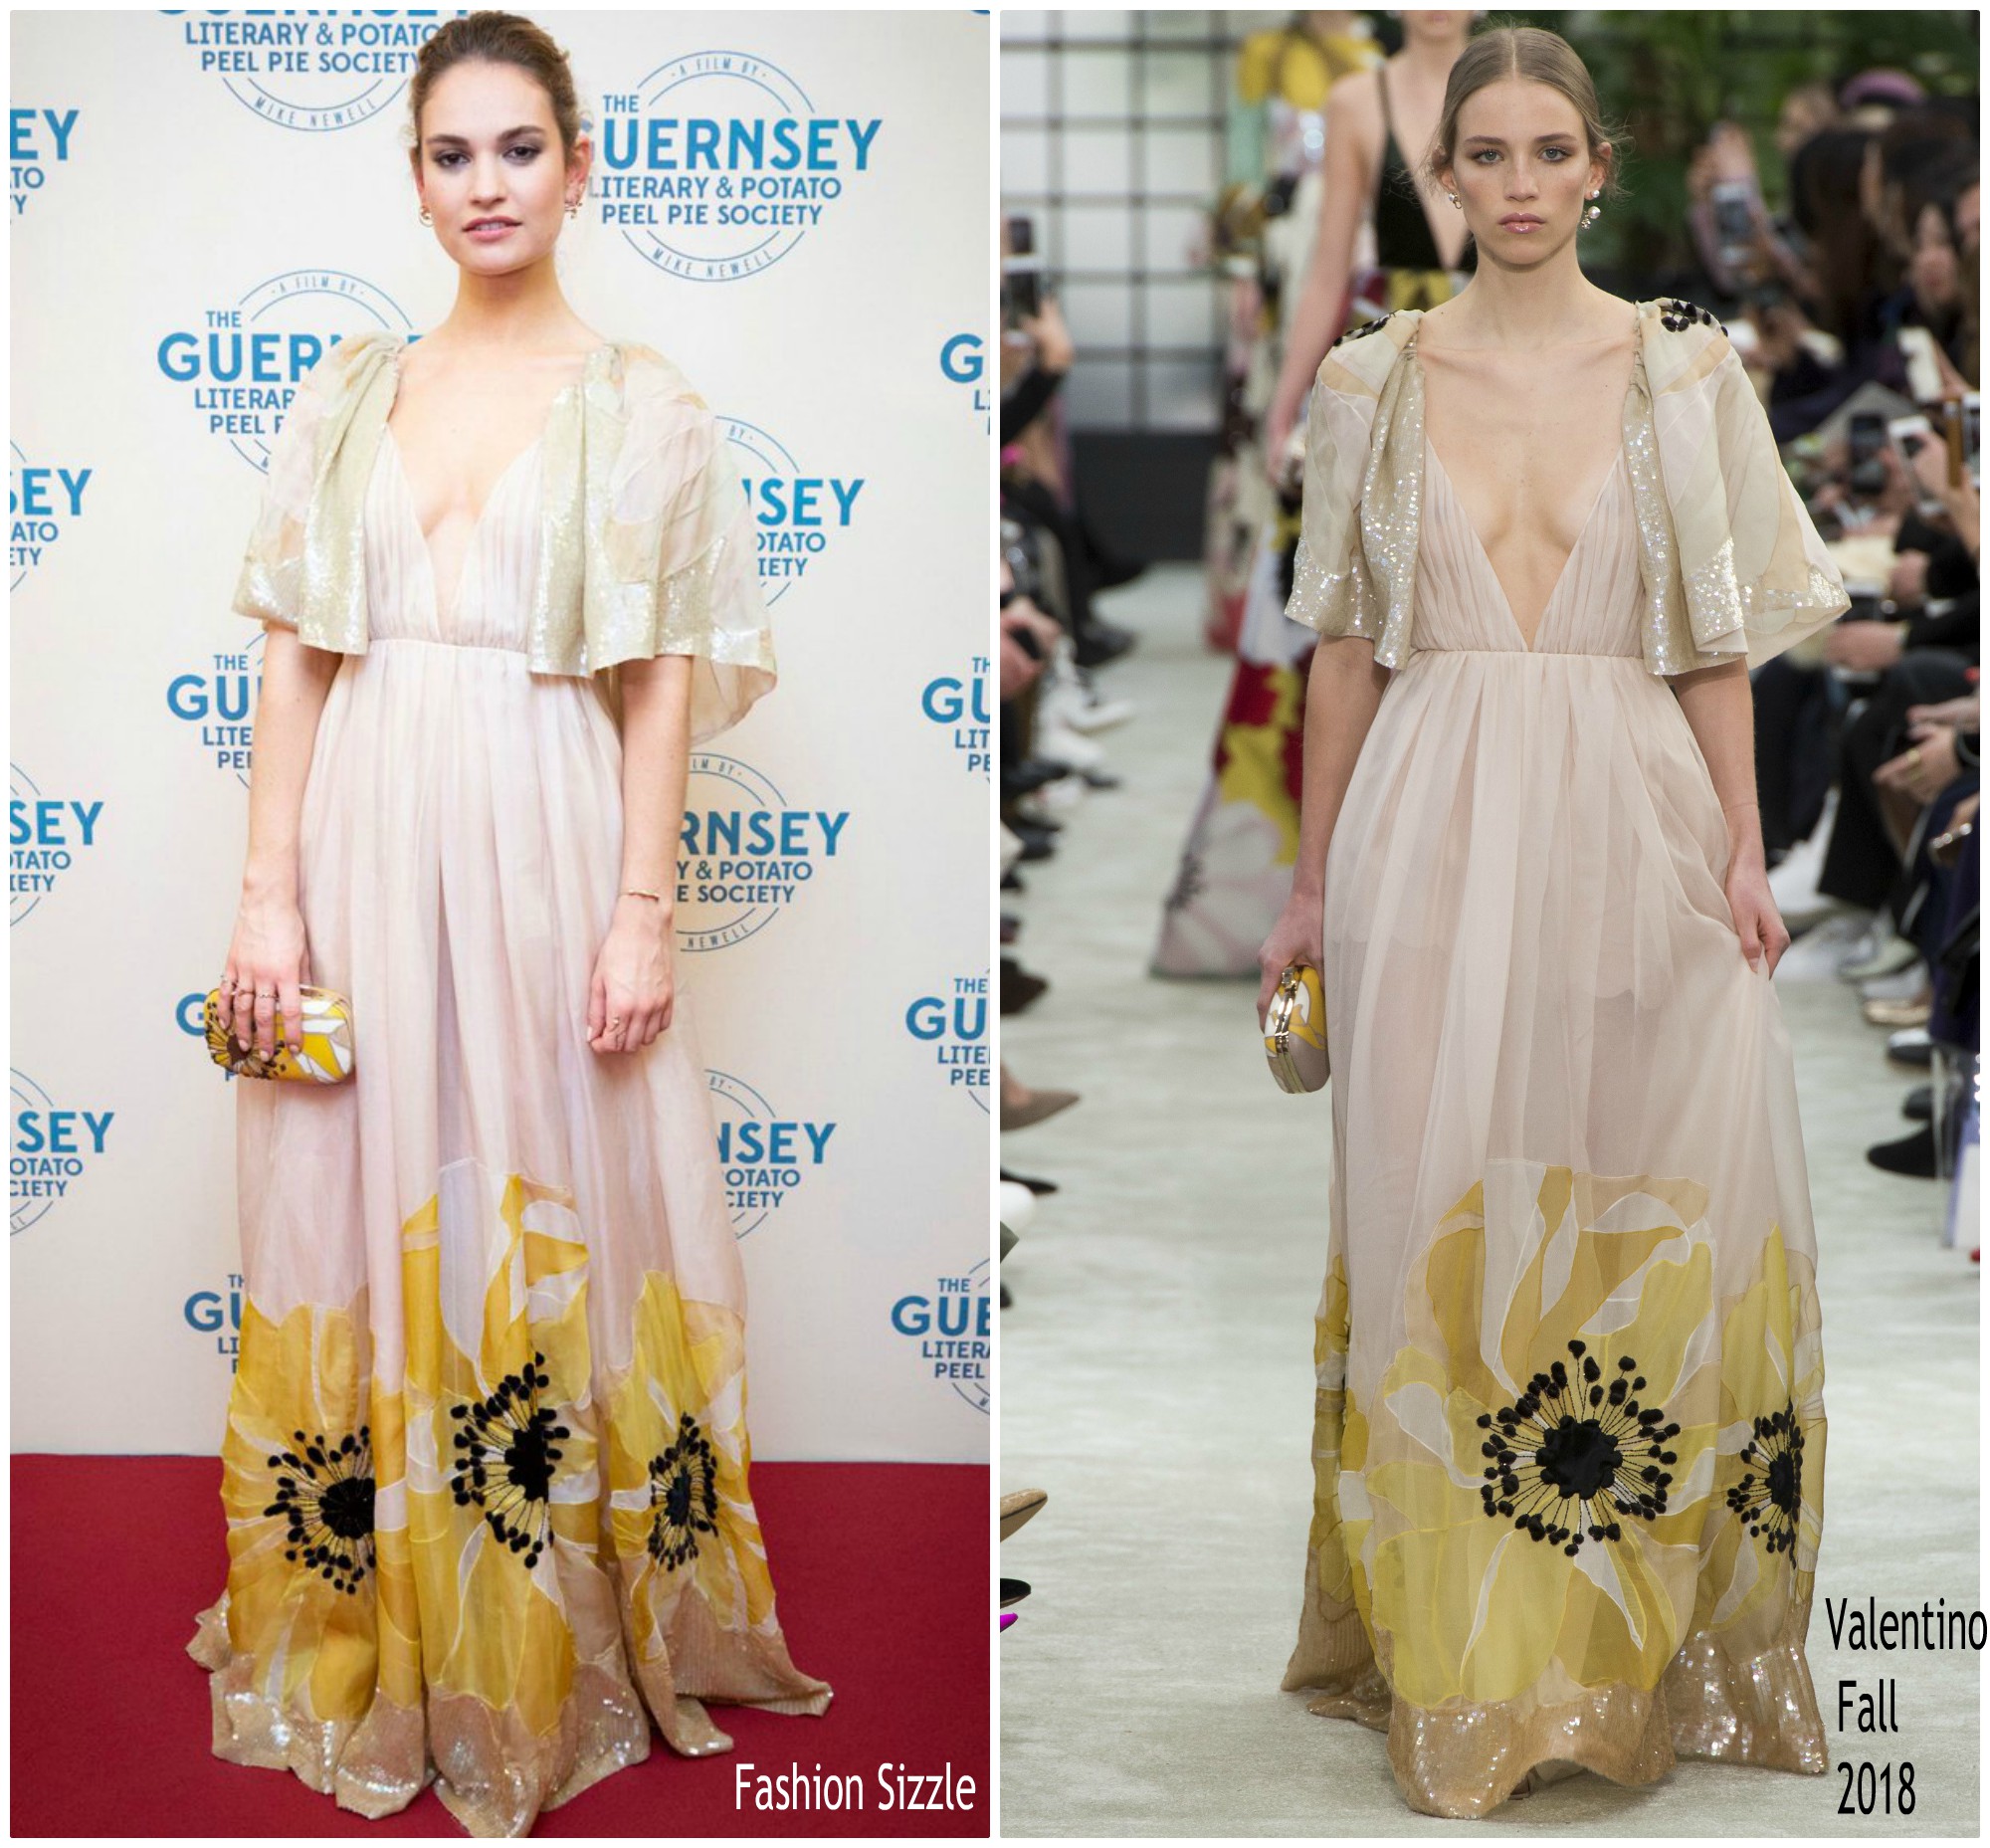 lily-james-in-valentino-the-guernsey-literary-potato-peel-pie-sciety-guernsey-premiere